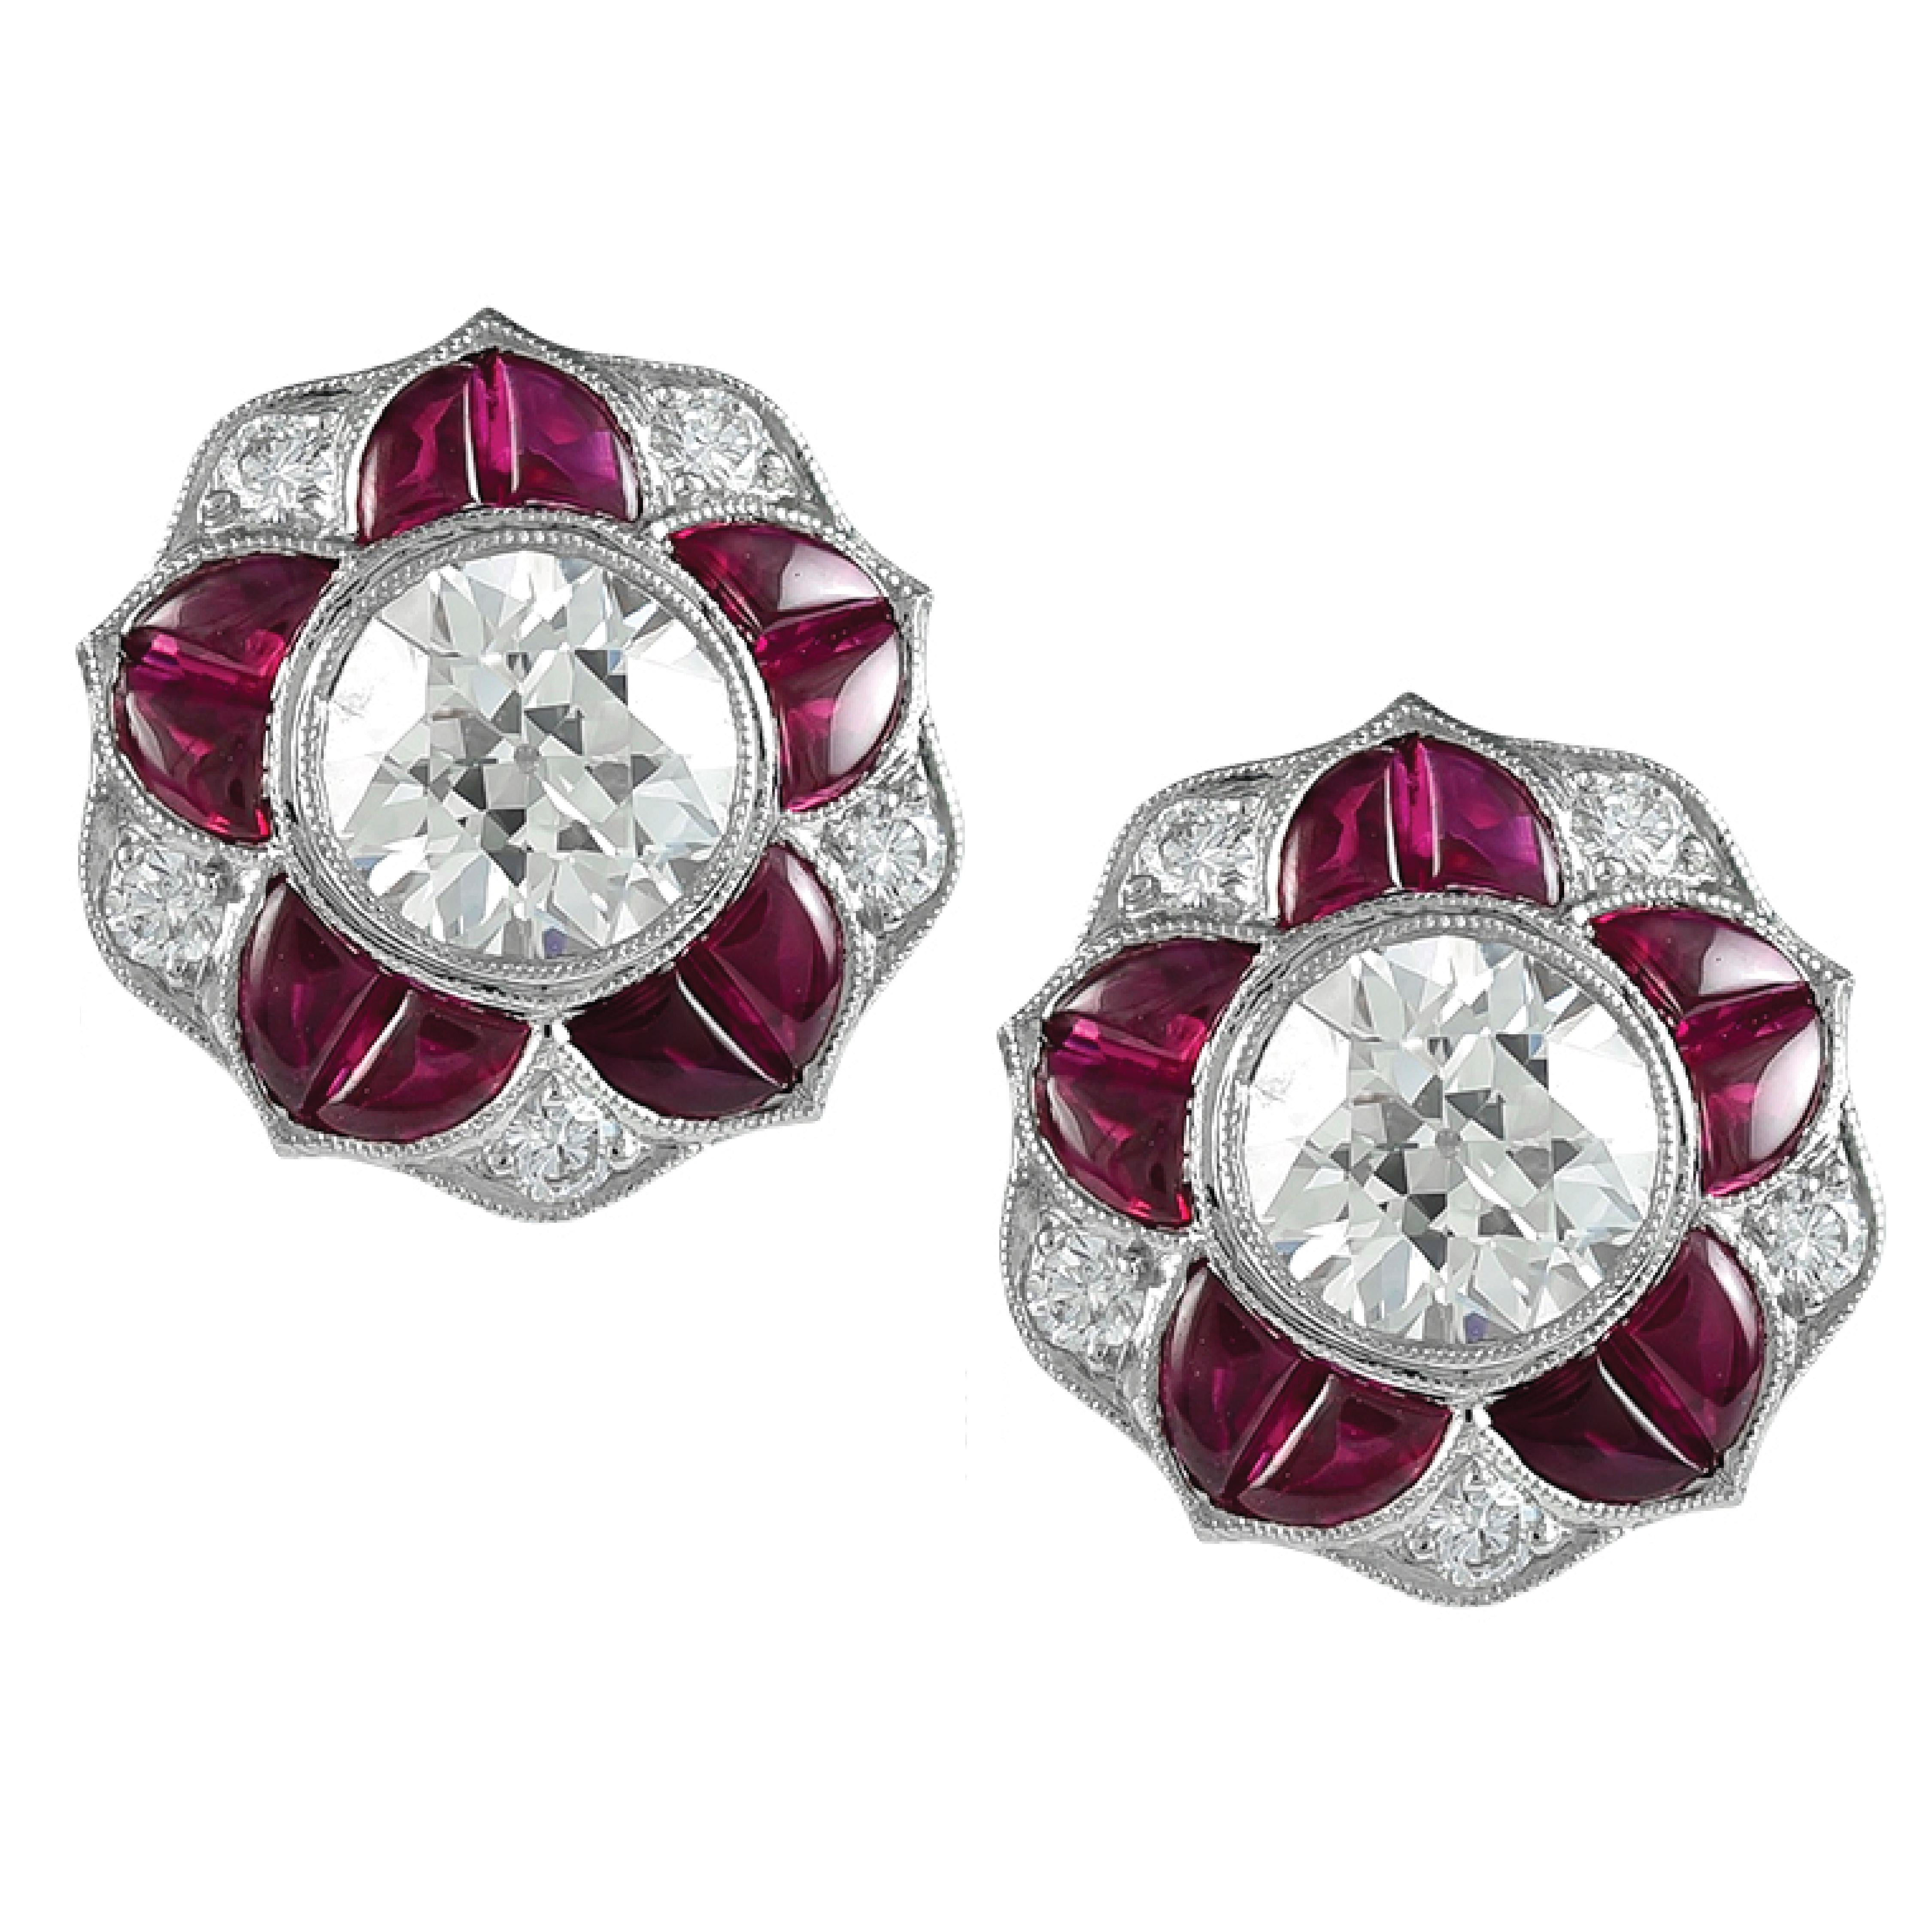 Elegant Platinum Ruby and Diamond Earrings Perfect for Evenings and Daily Use . Cabochon Rubies are Burmese total weight 4.51carats , Two Center O. E. Diamonds 1.66 carats , and Small Surrounding Diamonds 0.40 carats.

Sophia D by Joseph Dardashti